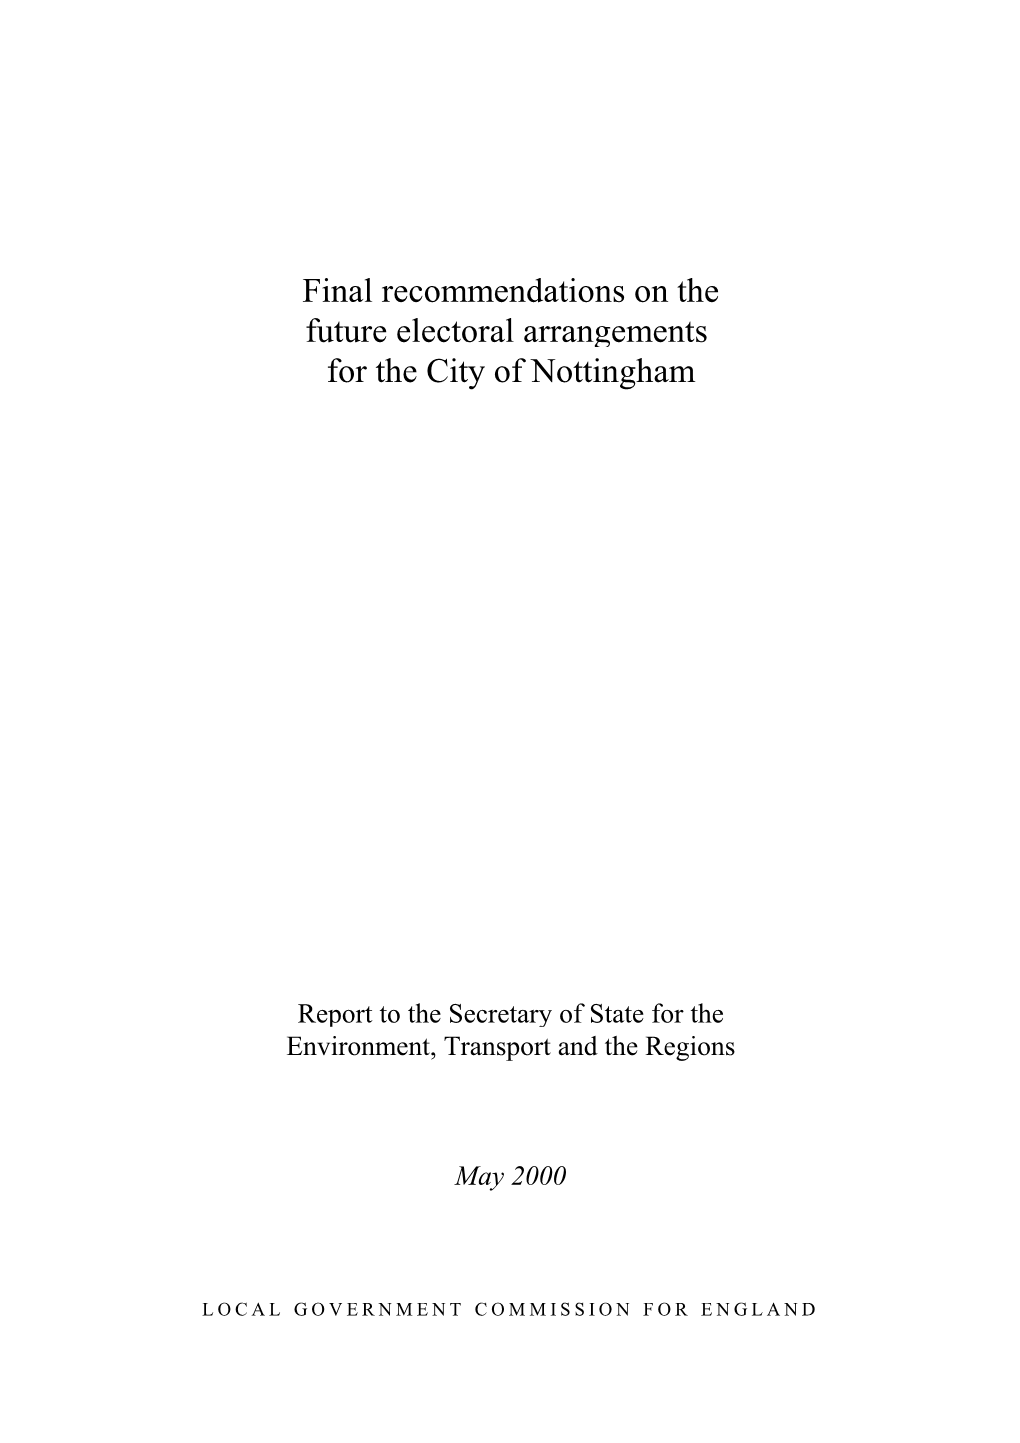 Final Recommendations on the Future Electoral Arrangements for the City of Nottingham